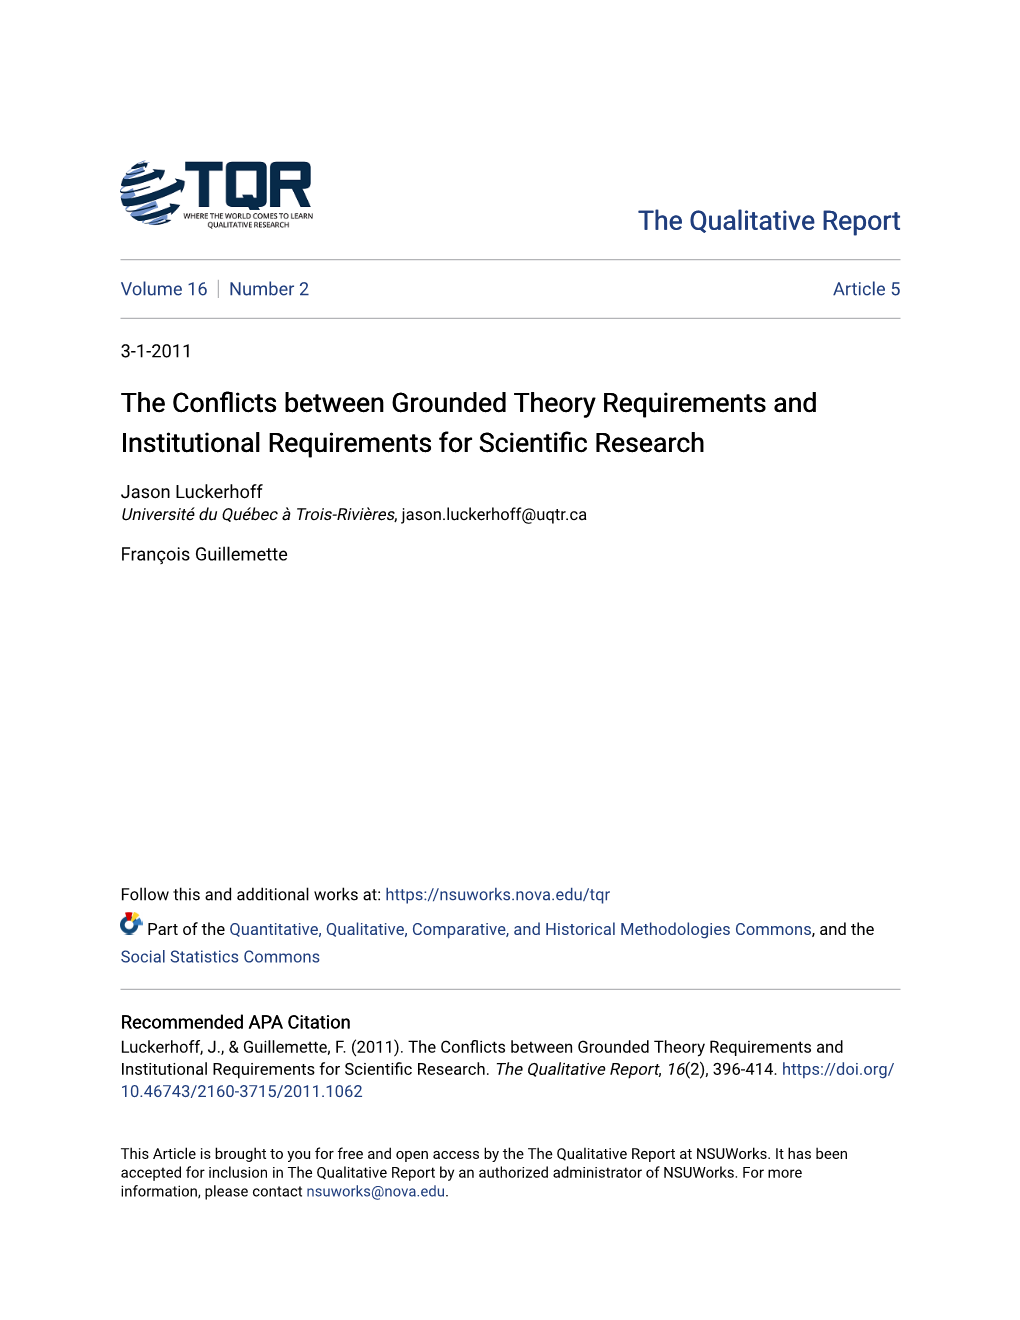 The Conflicts Between Grounded Theory Requirements and Institutional Requirements for Scientific Research